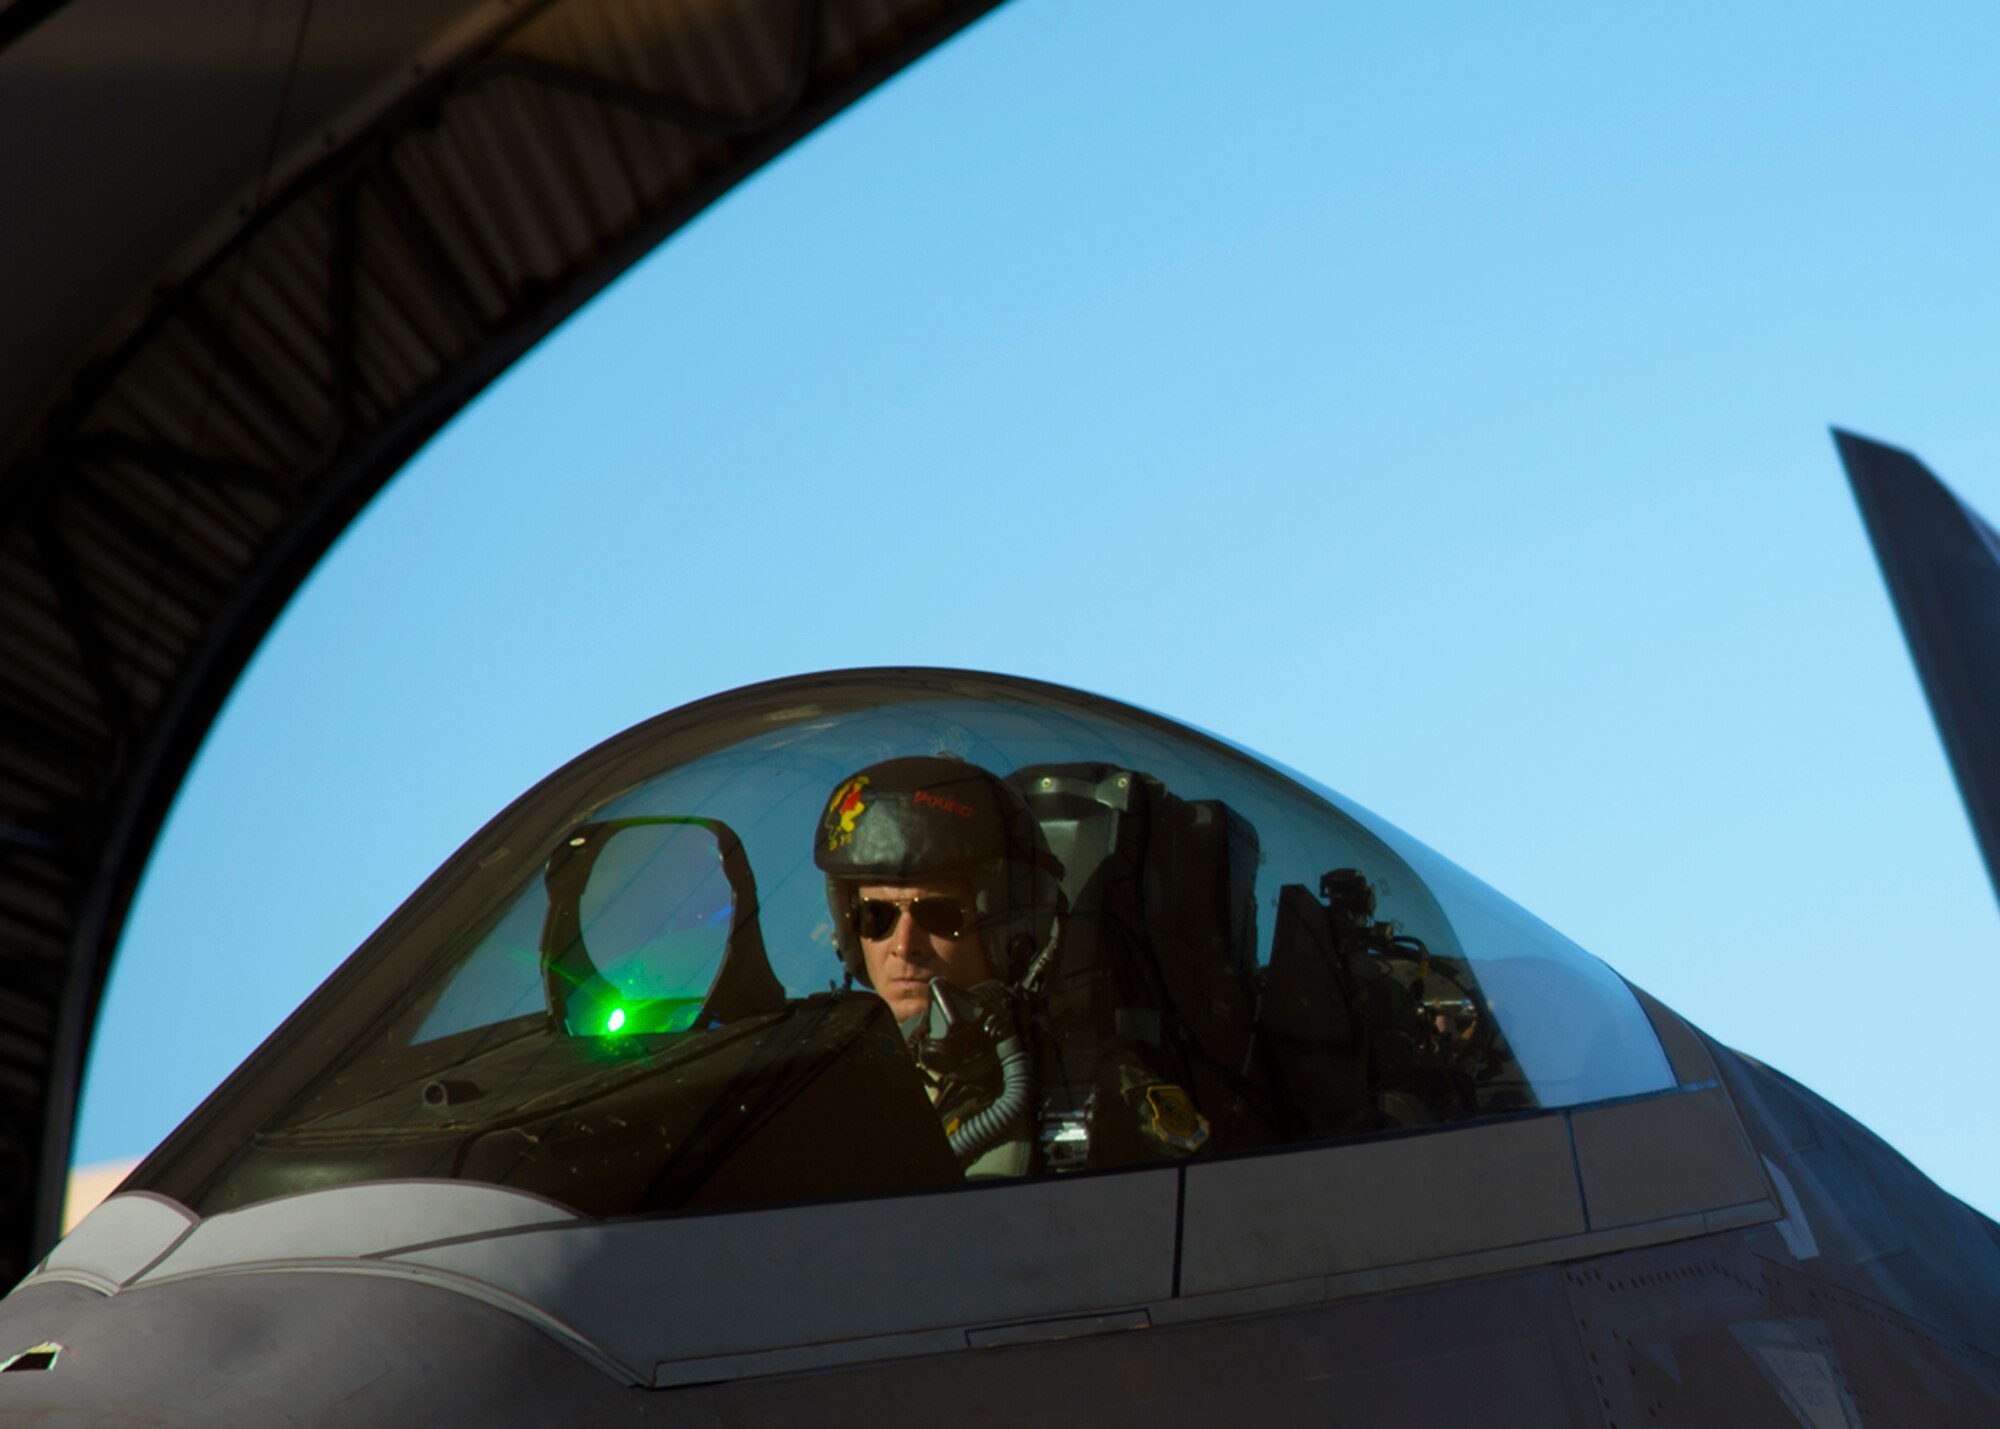 A pilot from the Hawaiian Raptors prepares the F-22 Raptor for engine start on Joint Base Pearl Harbor-Hickam, Hawaii, April 20, 2015. The F-22 Raptor’s combination of stealth, supercruise, maneuverability, and integrated avionics, coupled with improved supportability, represents an exponential leap in warfighting capabilities. The Raptor performs both air-to-air and air-to-ground missions allowing full realization of operational concepts vital to the 21st century Air Force. (U.S. Air Force photo by Tech. Sgt. Aaron Oelrich/Released)   